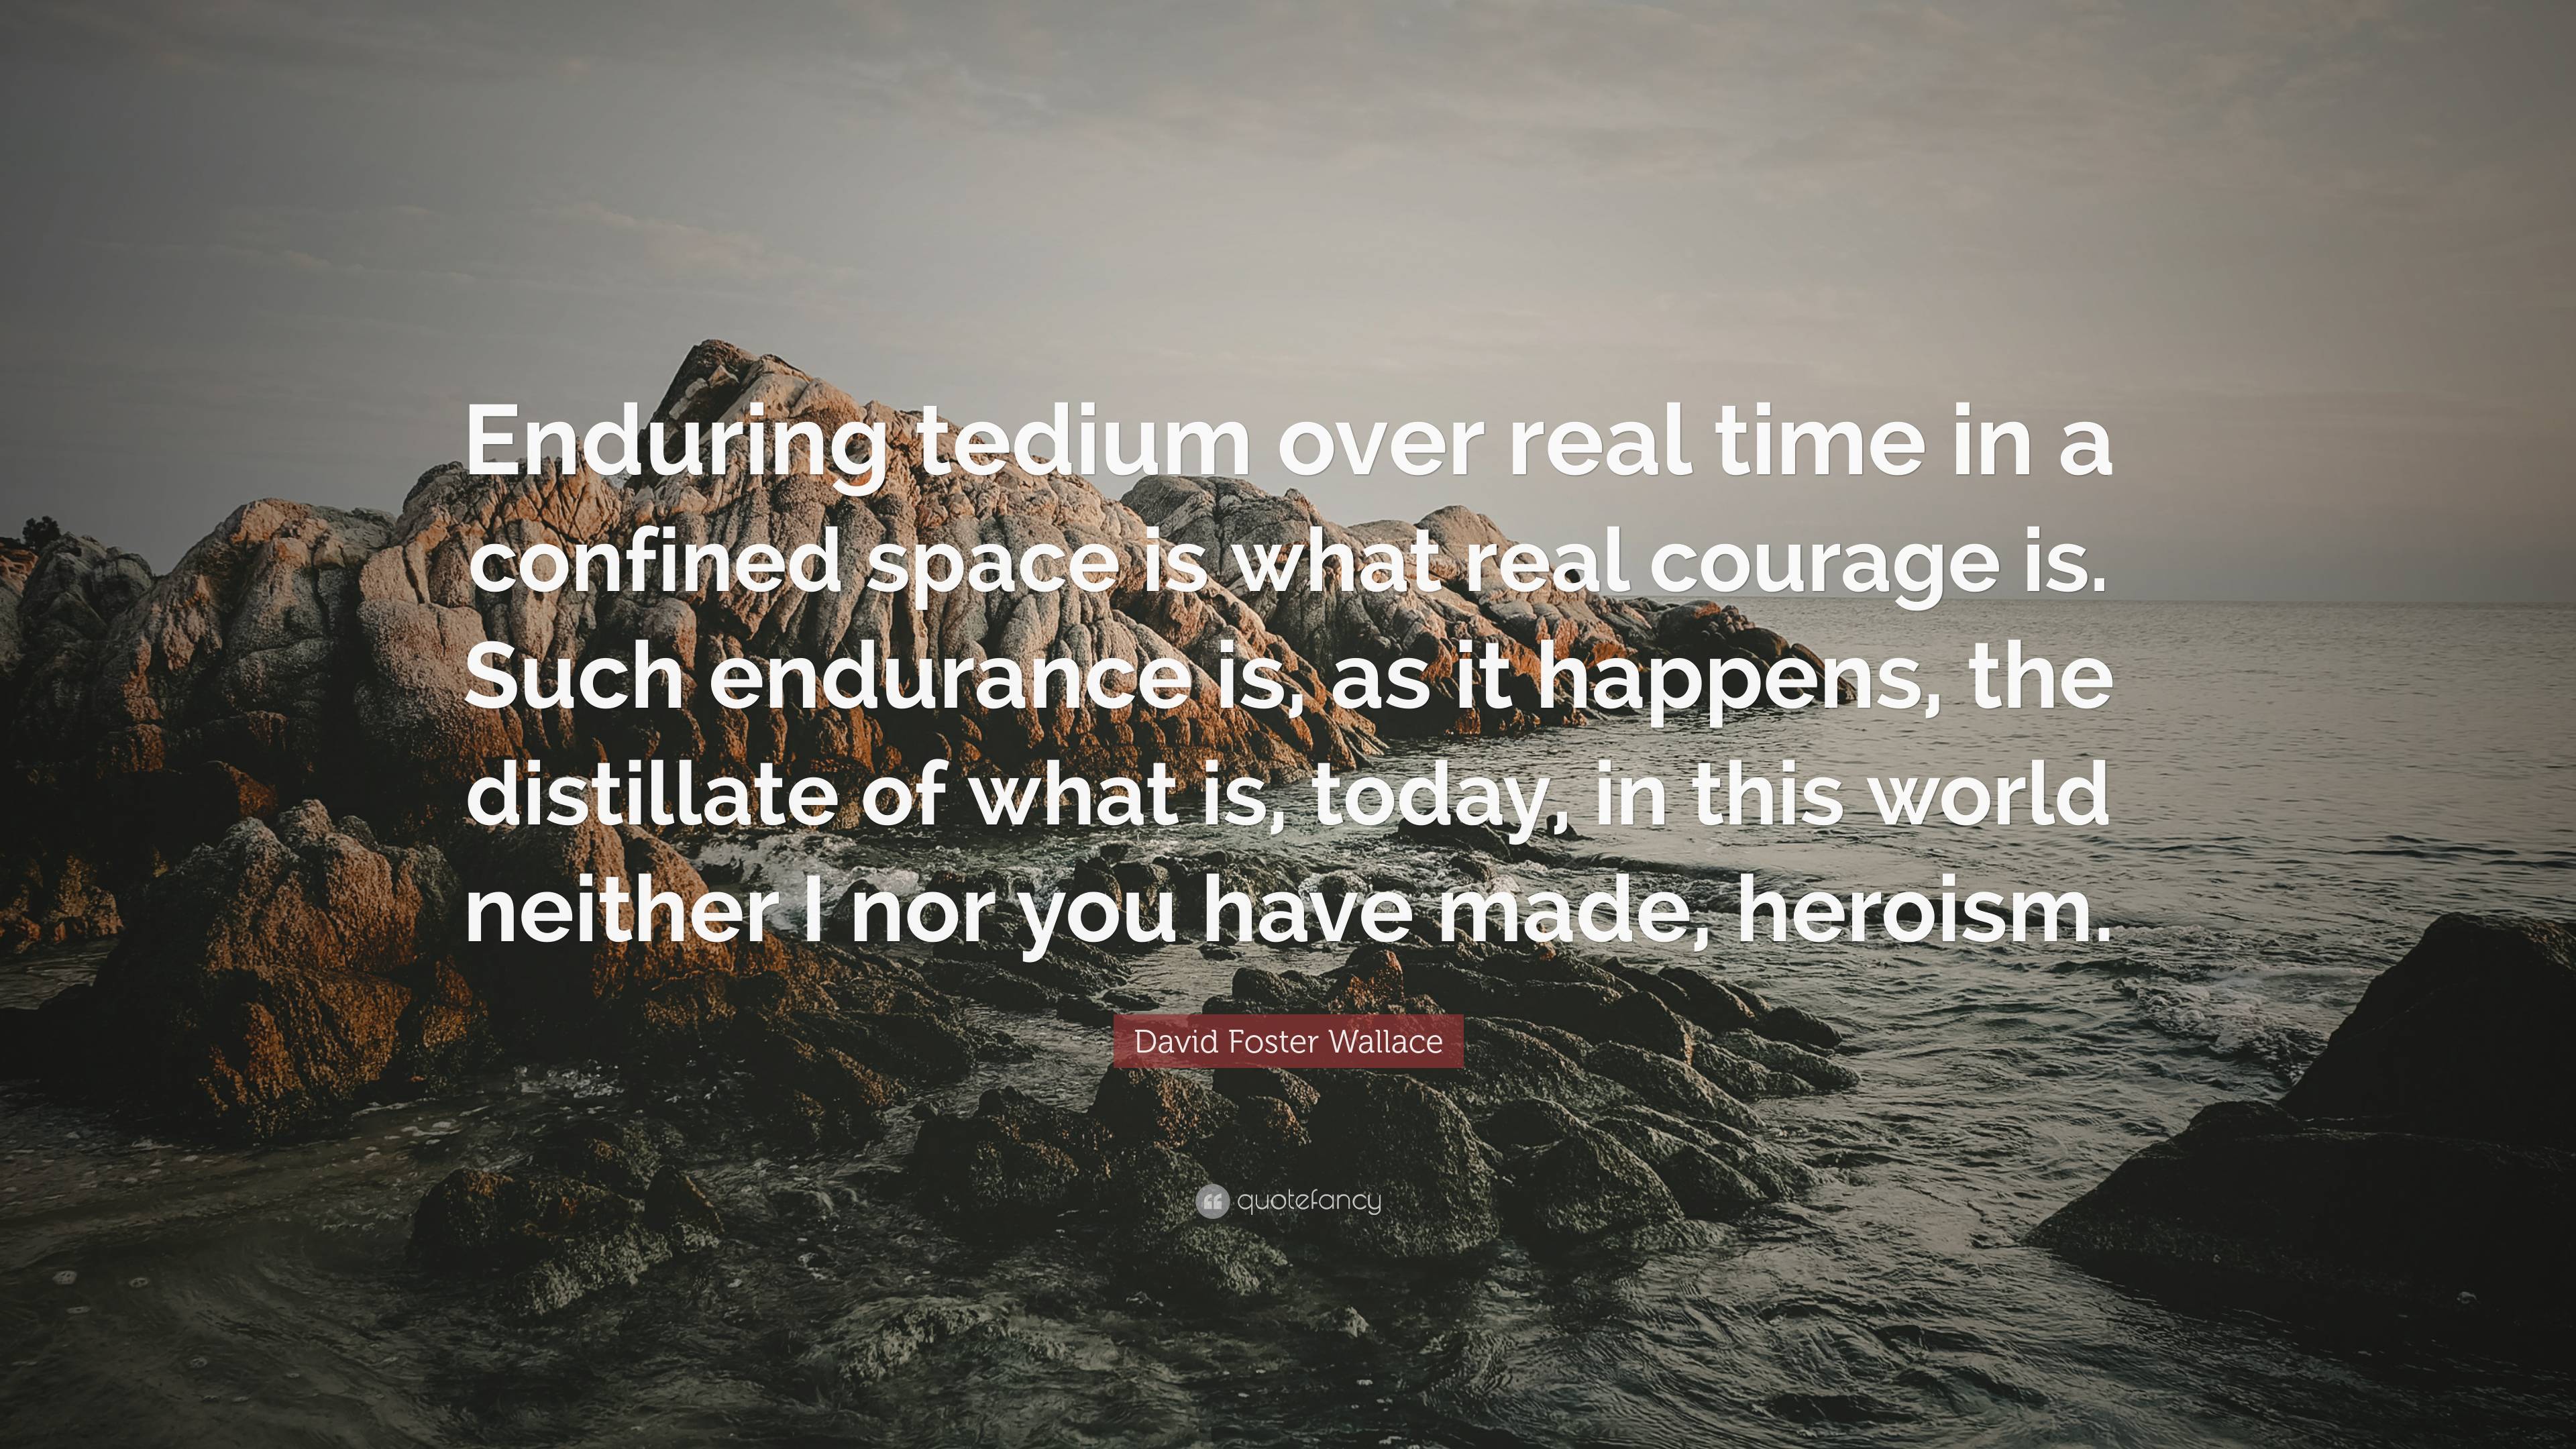 David Foster Wallace Quote: “Enduring tedium over real time in a ...